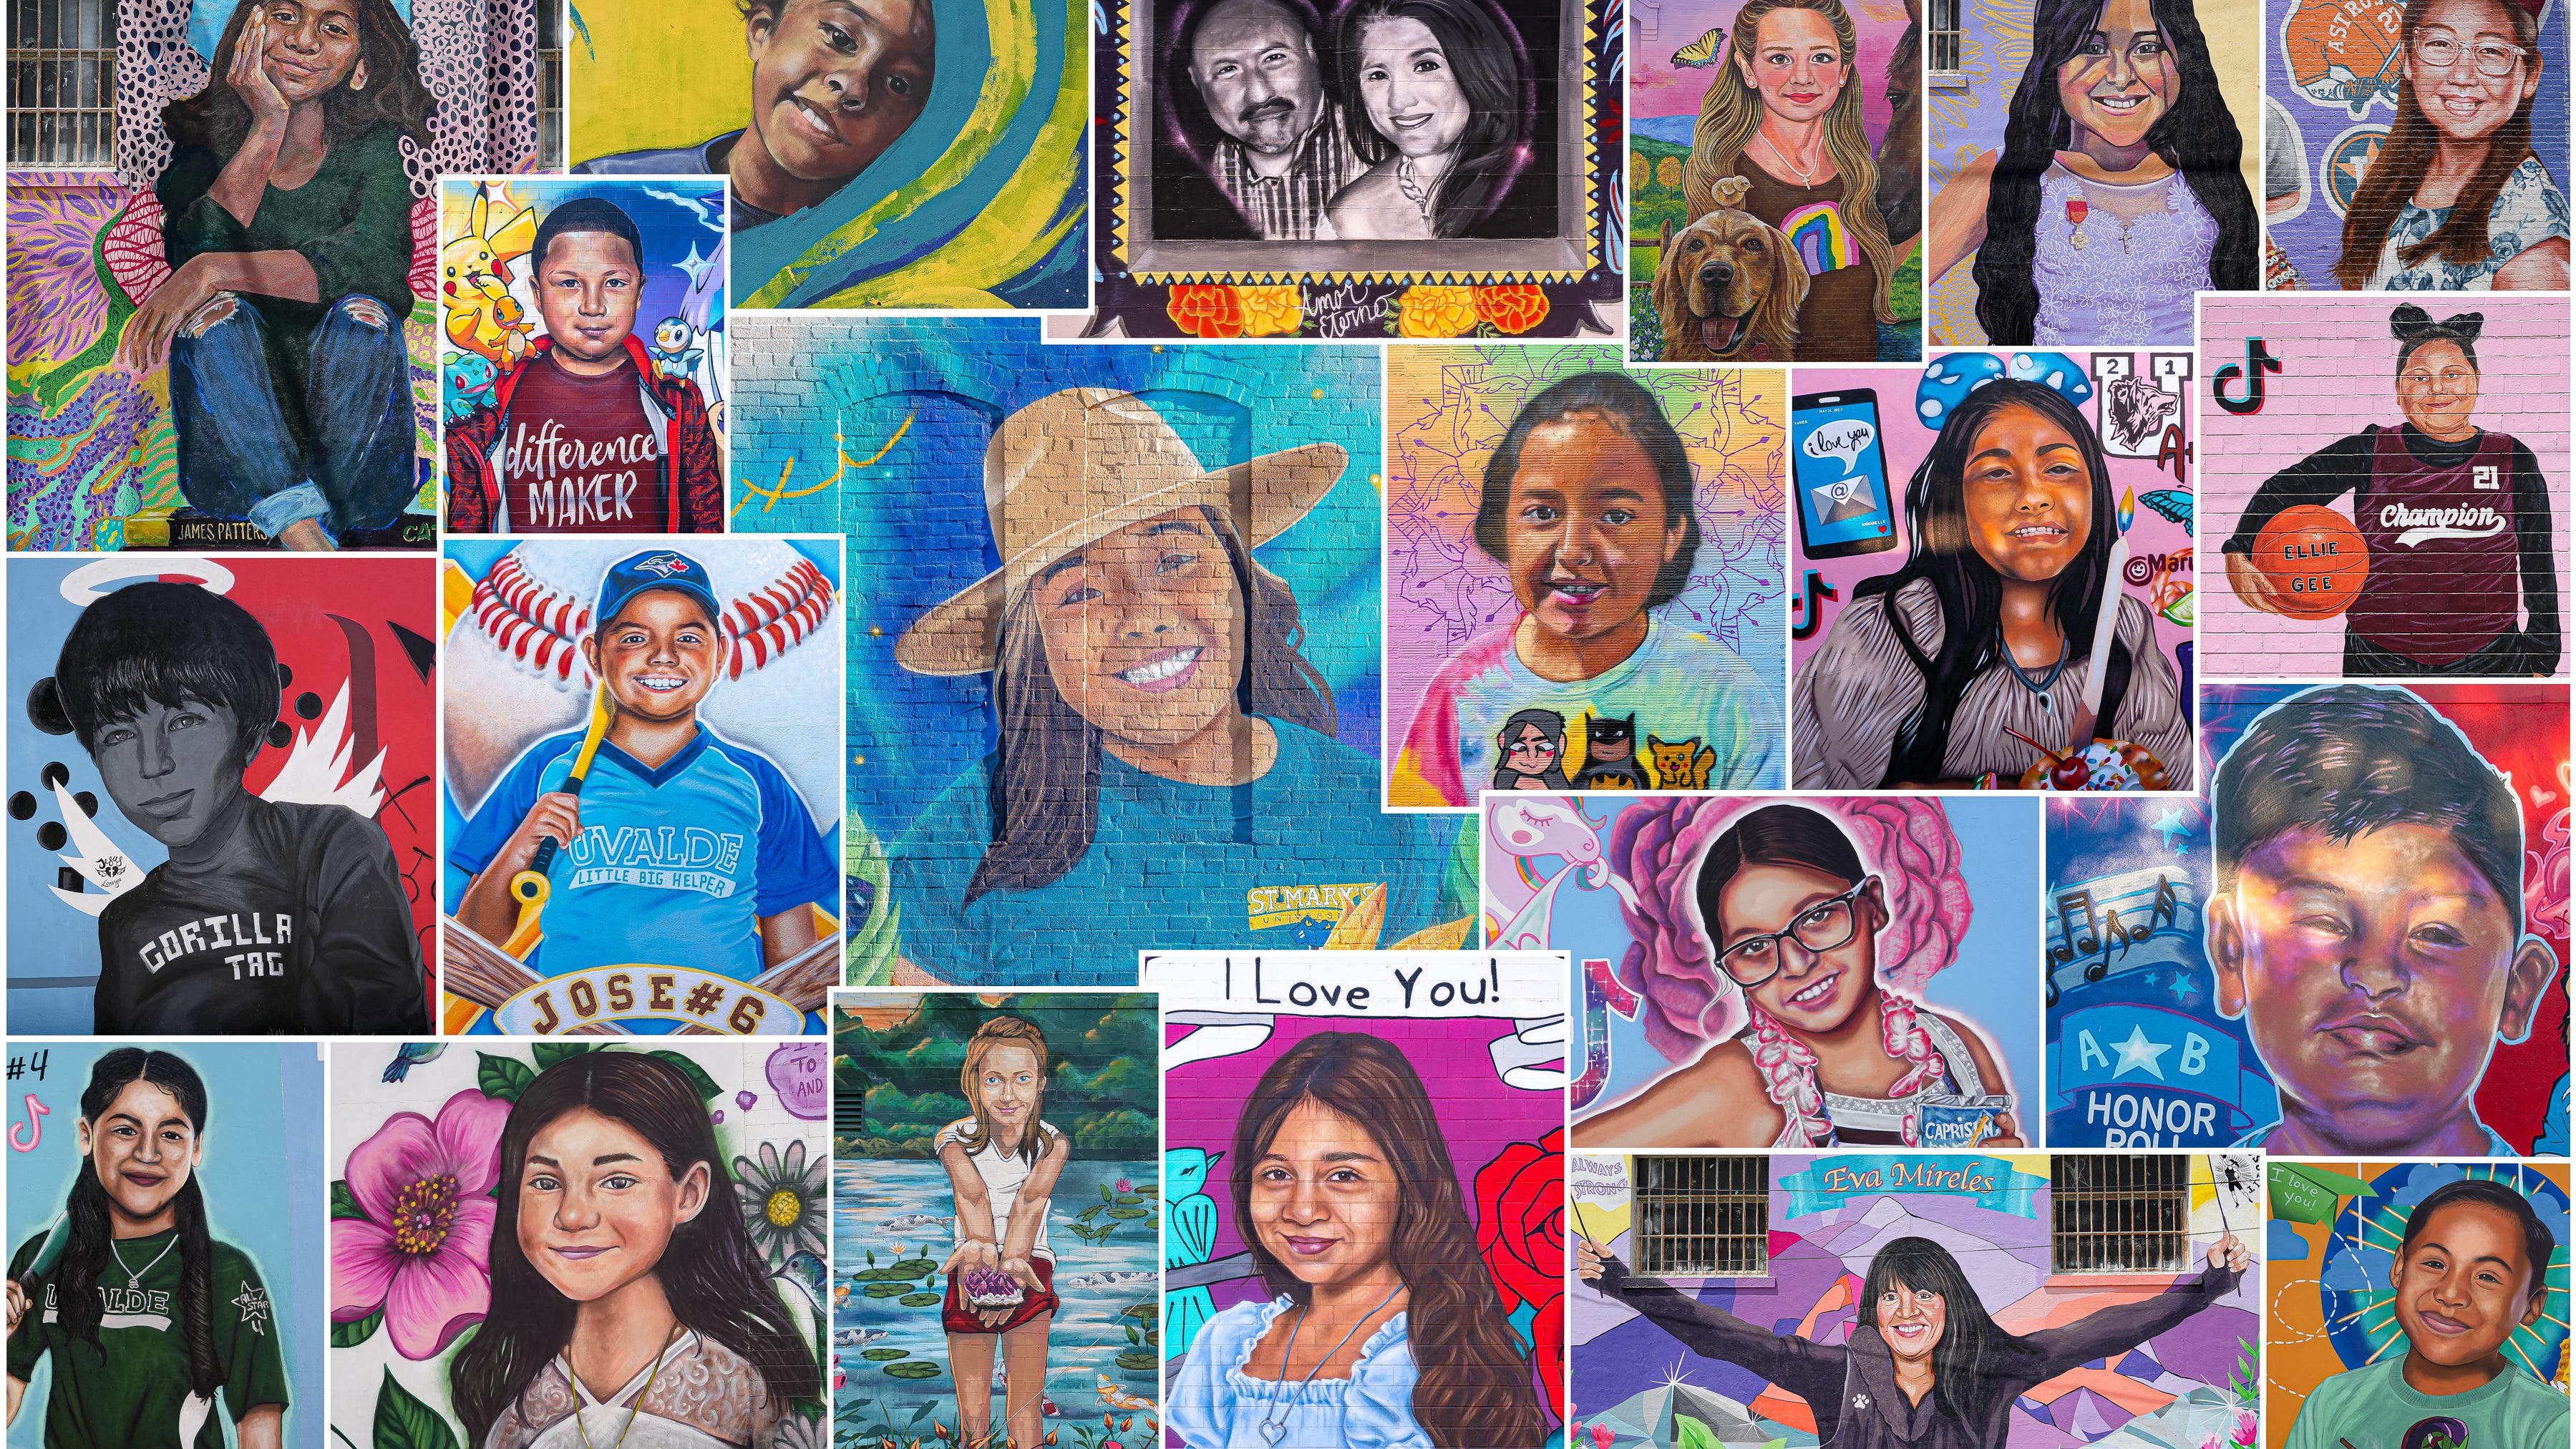 The murals painted for the 21 victims of the May, 2022 mass shooting at Robb Elementary School in Uvalde, Texas.